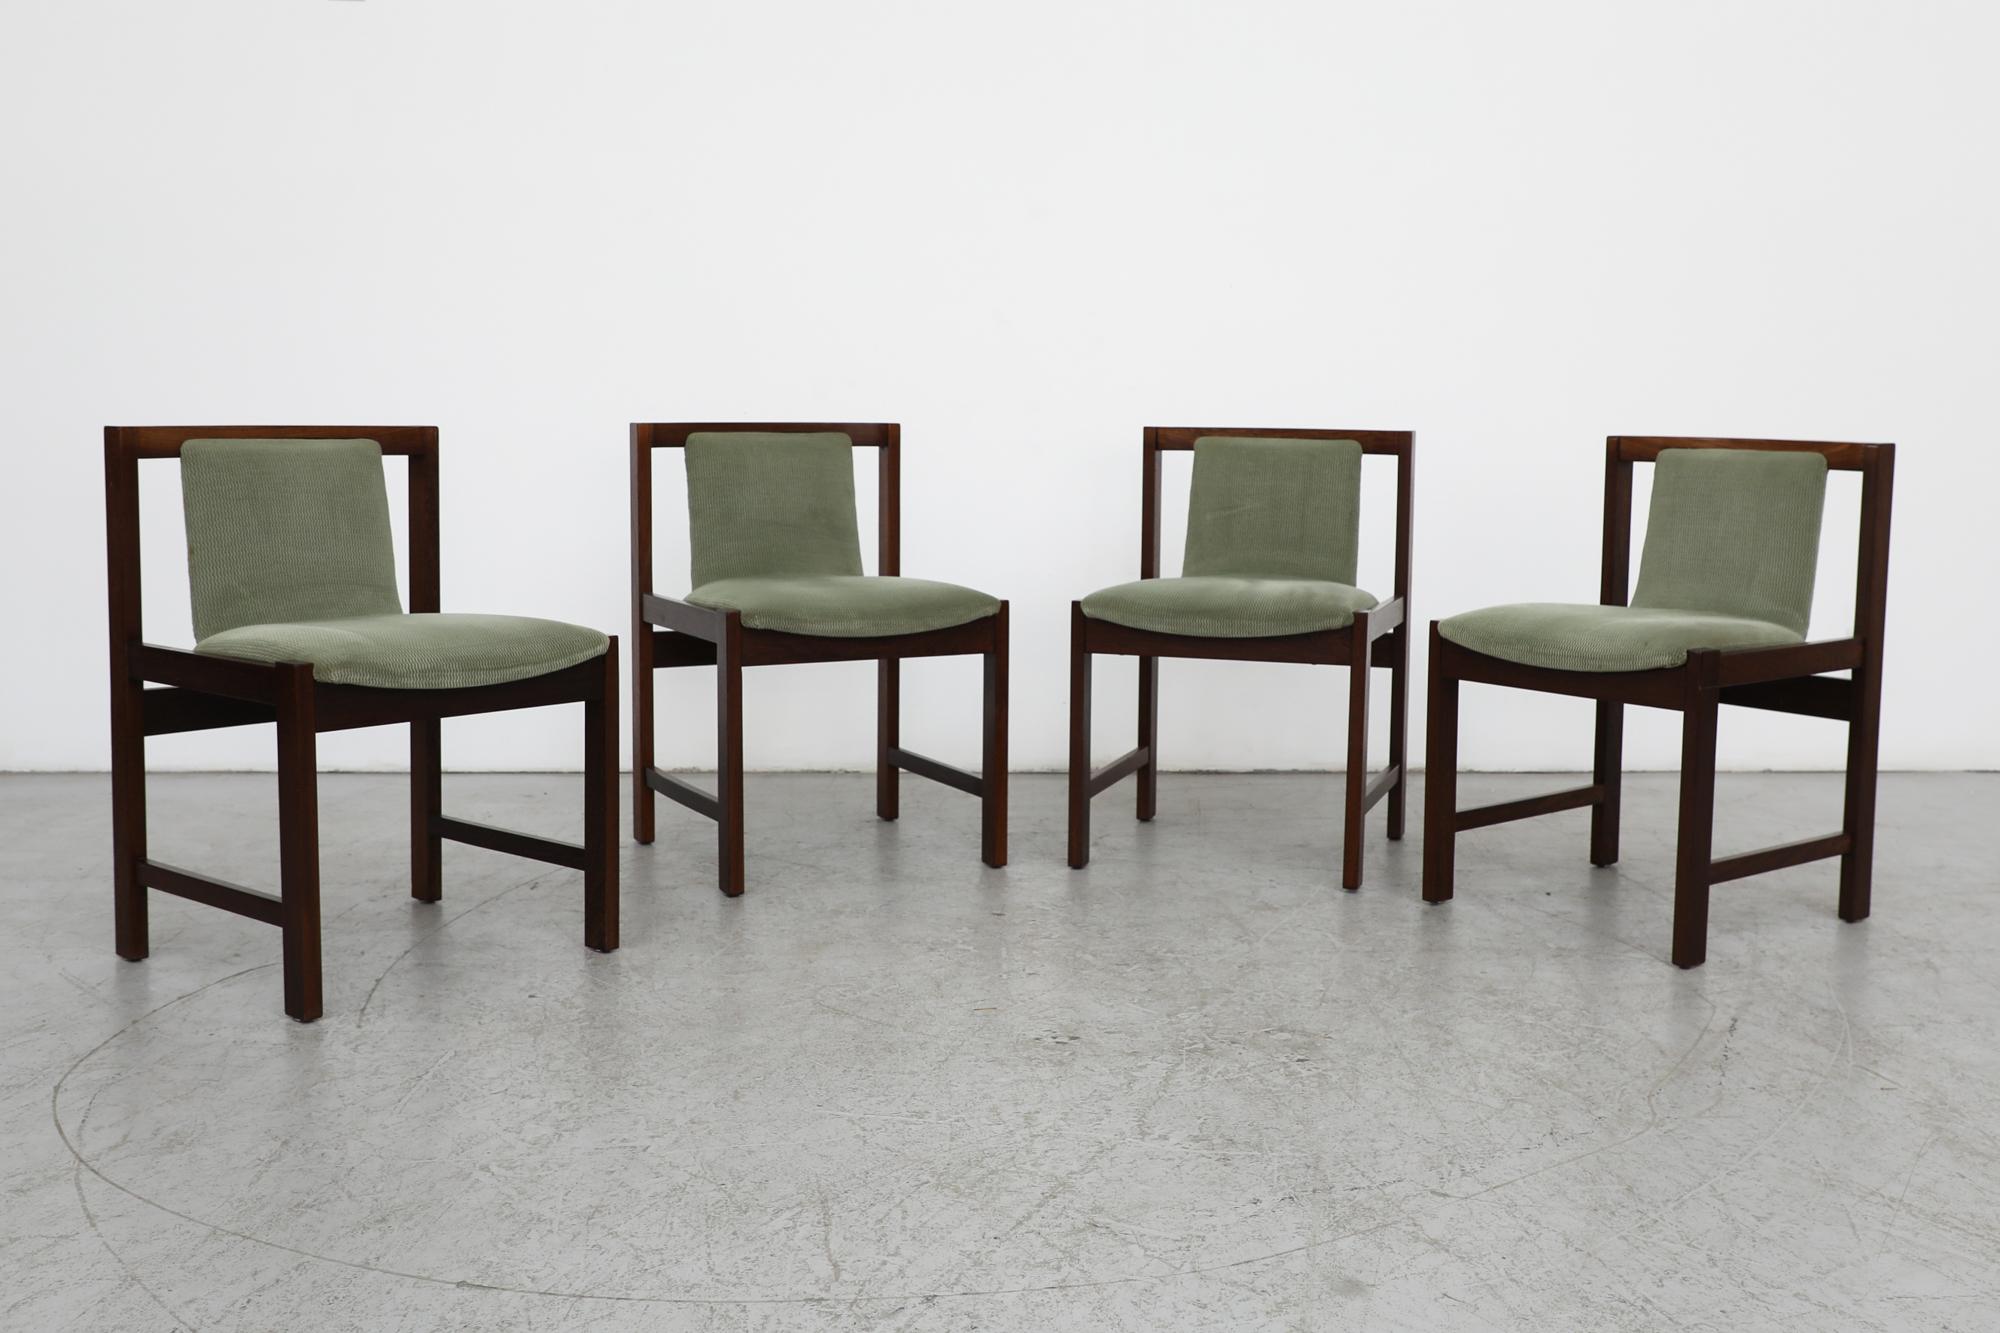 Handsome set of 4 square framed, mid century, wenge dining chairs with original sage green slipper seating upholstery. Attributed to Dutch design icon Cees Braakman In original condition with some visible age appropriate wear consistent with